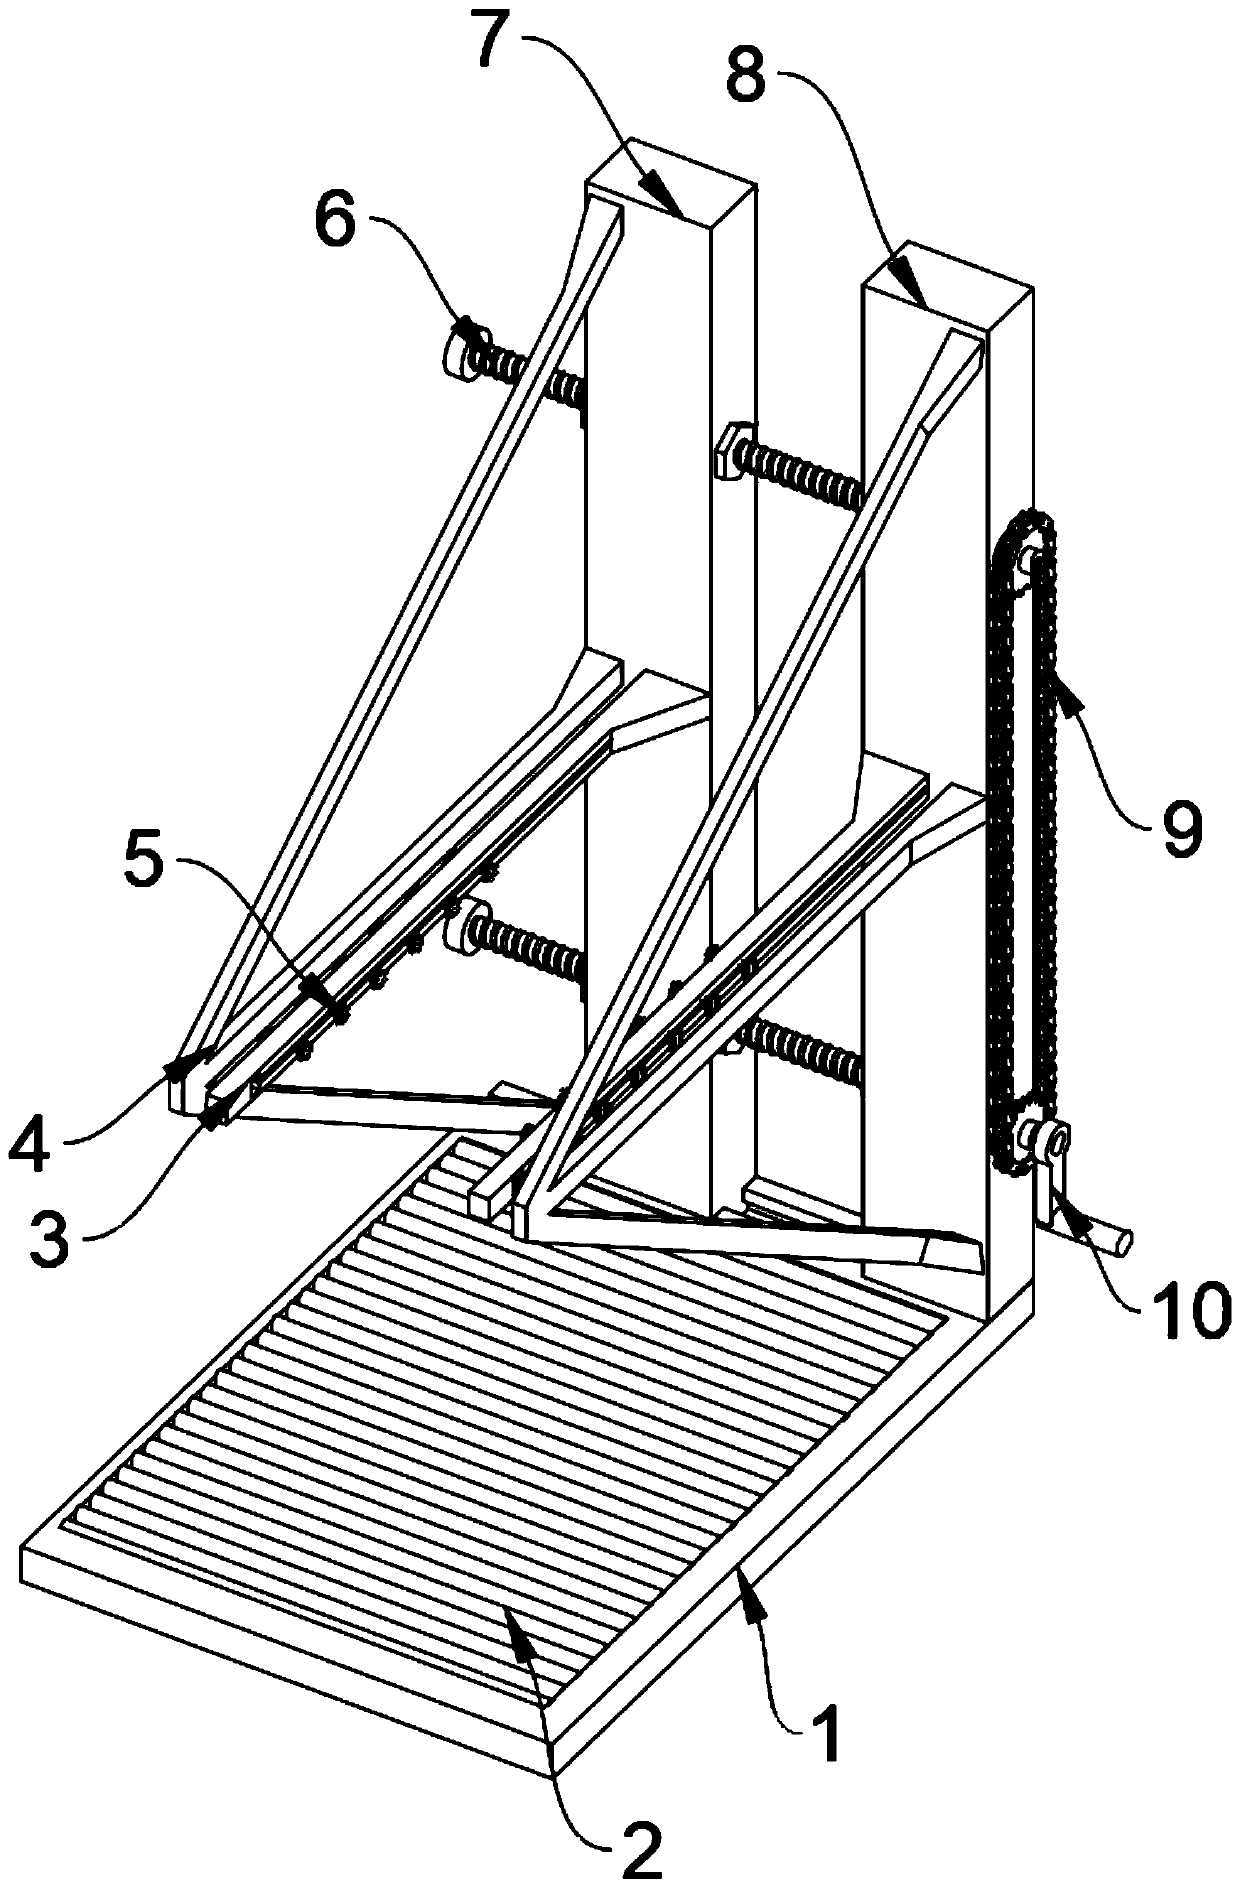 Positioning and welding integrated mechanism for building pouring frame